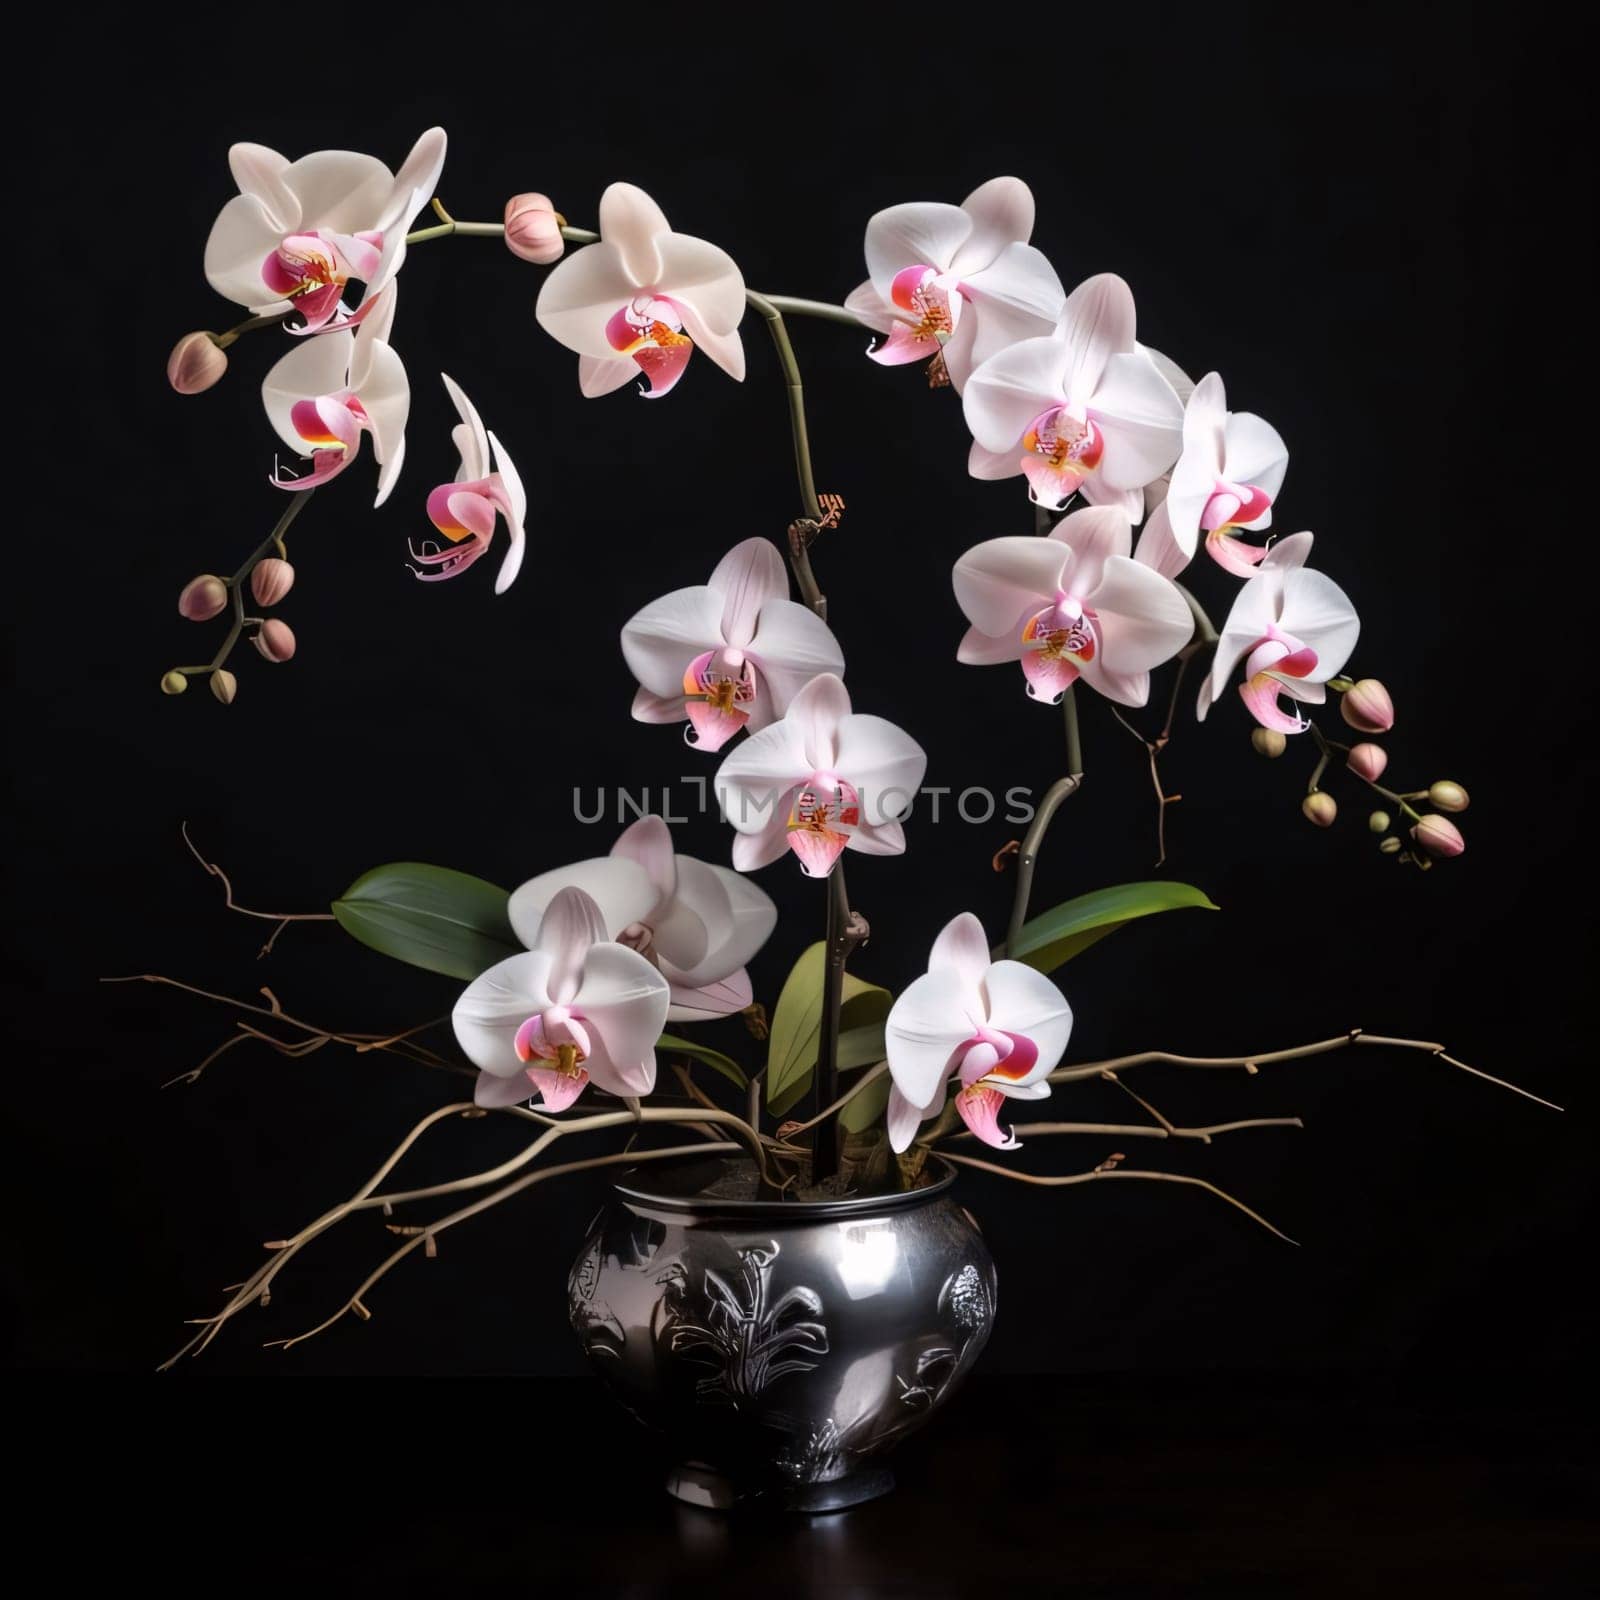 Pink white orchid in a pot on a dark background. Flowering flowers, a symbol of spring, new life. A joyful time of nature waking up to life.